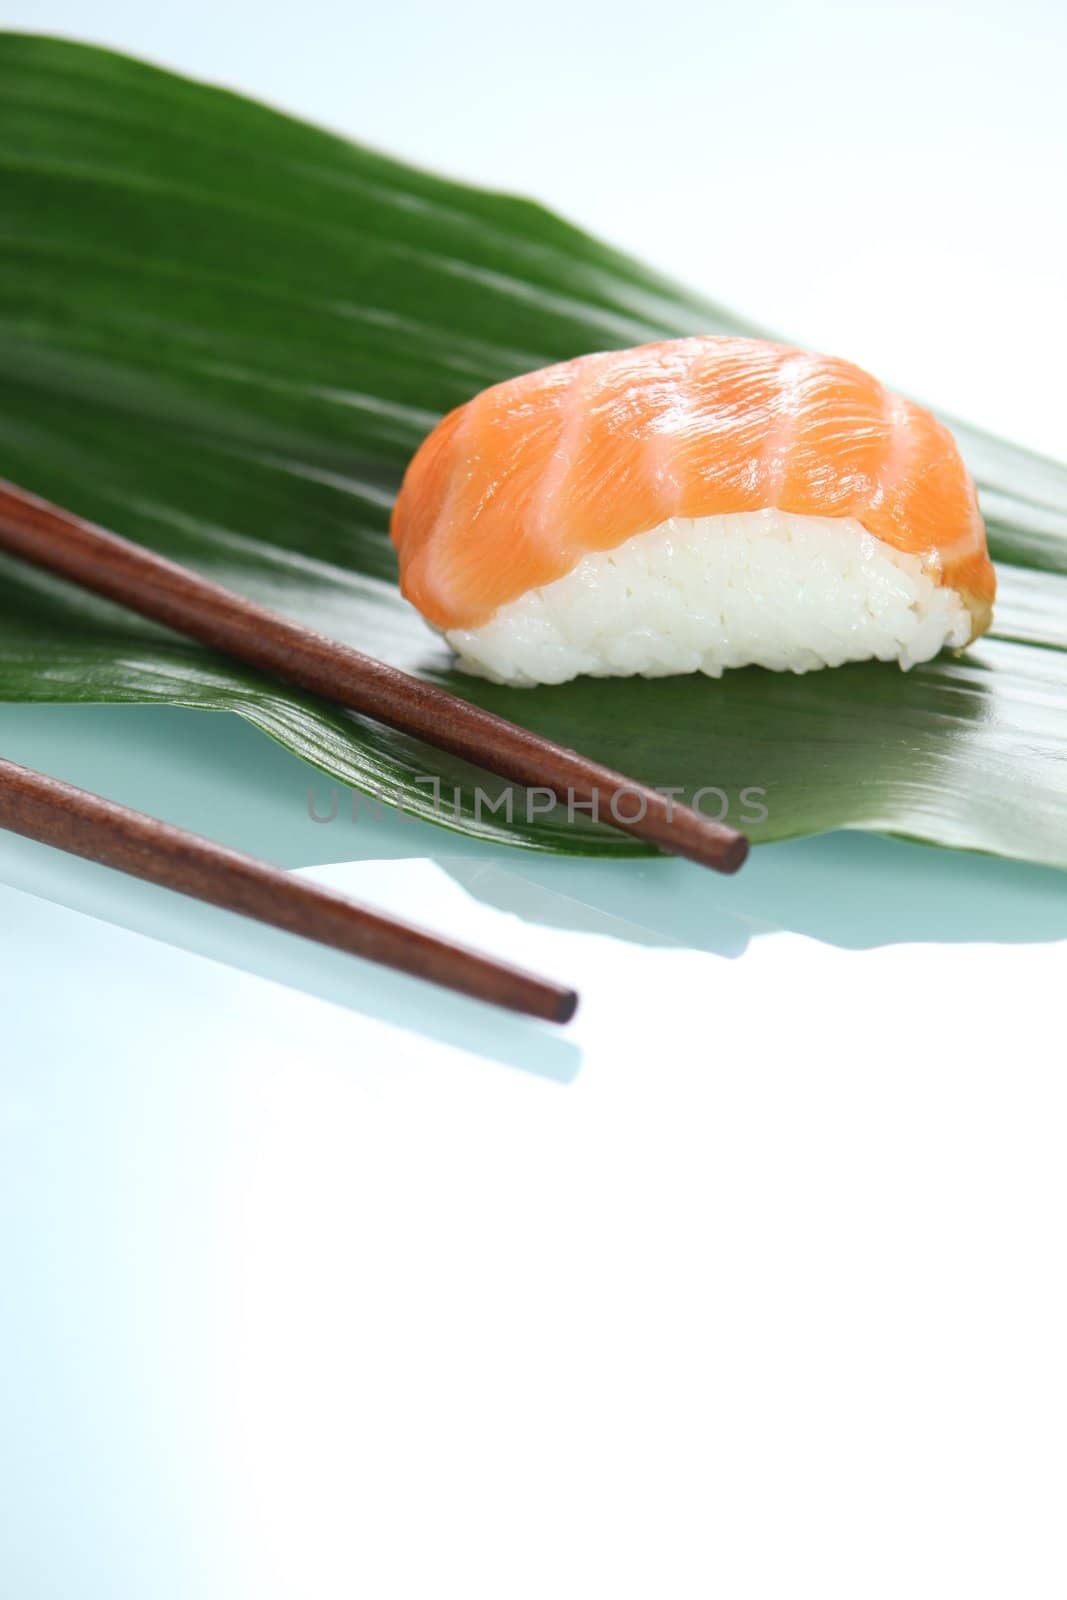 Sushi and chopsticks by phovoir